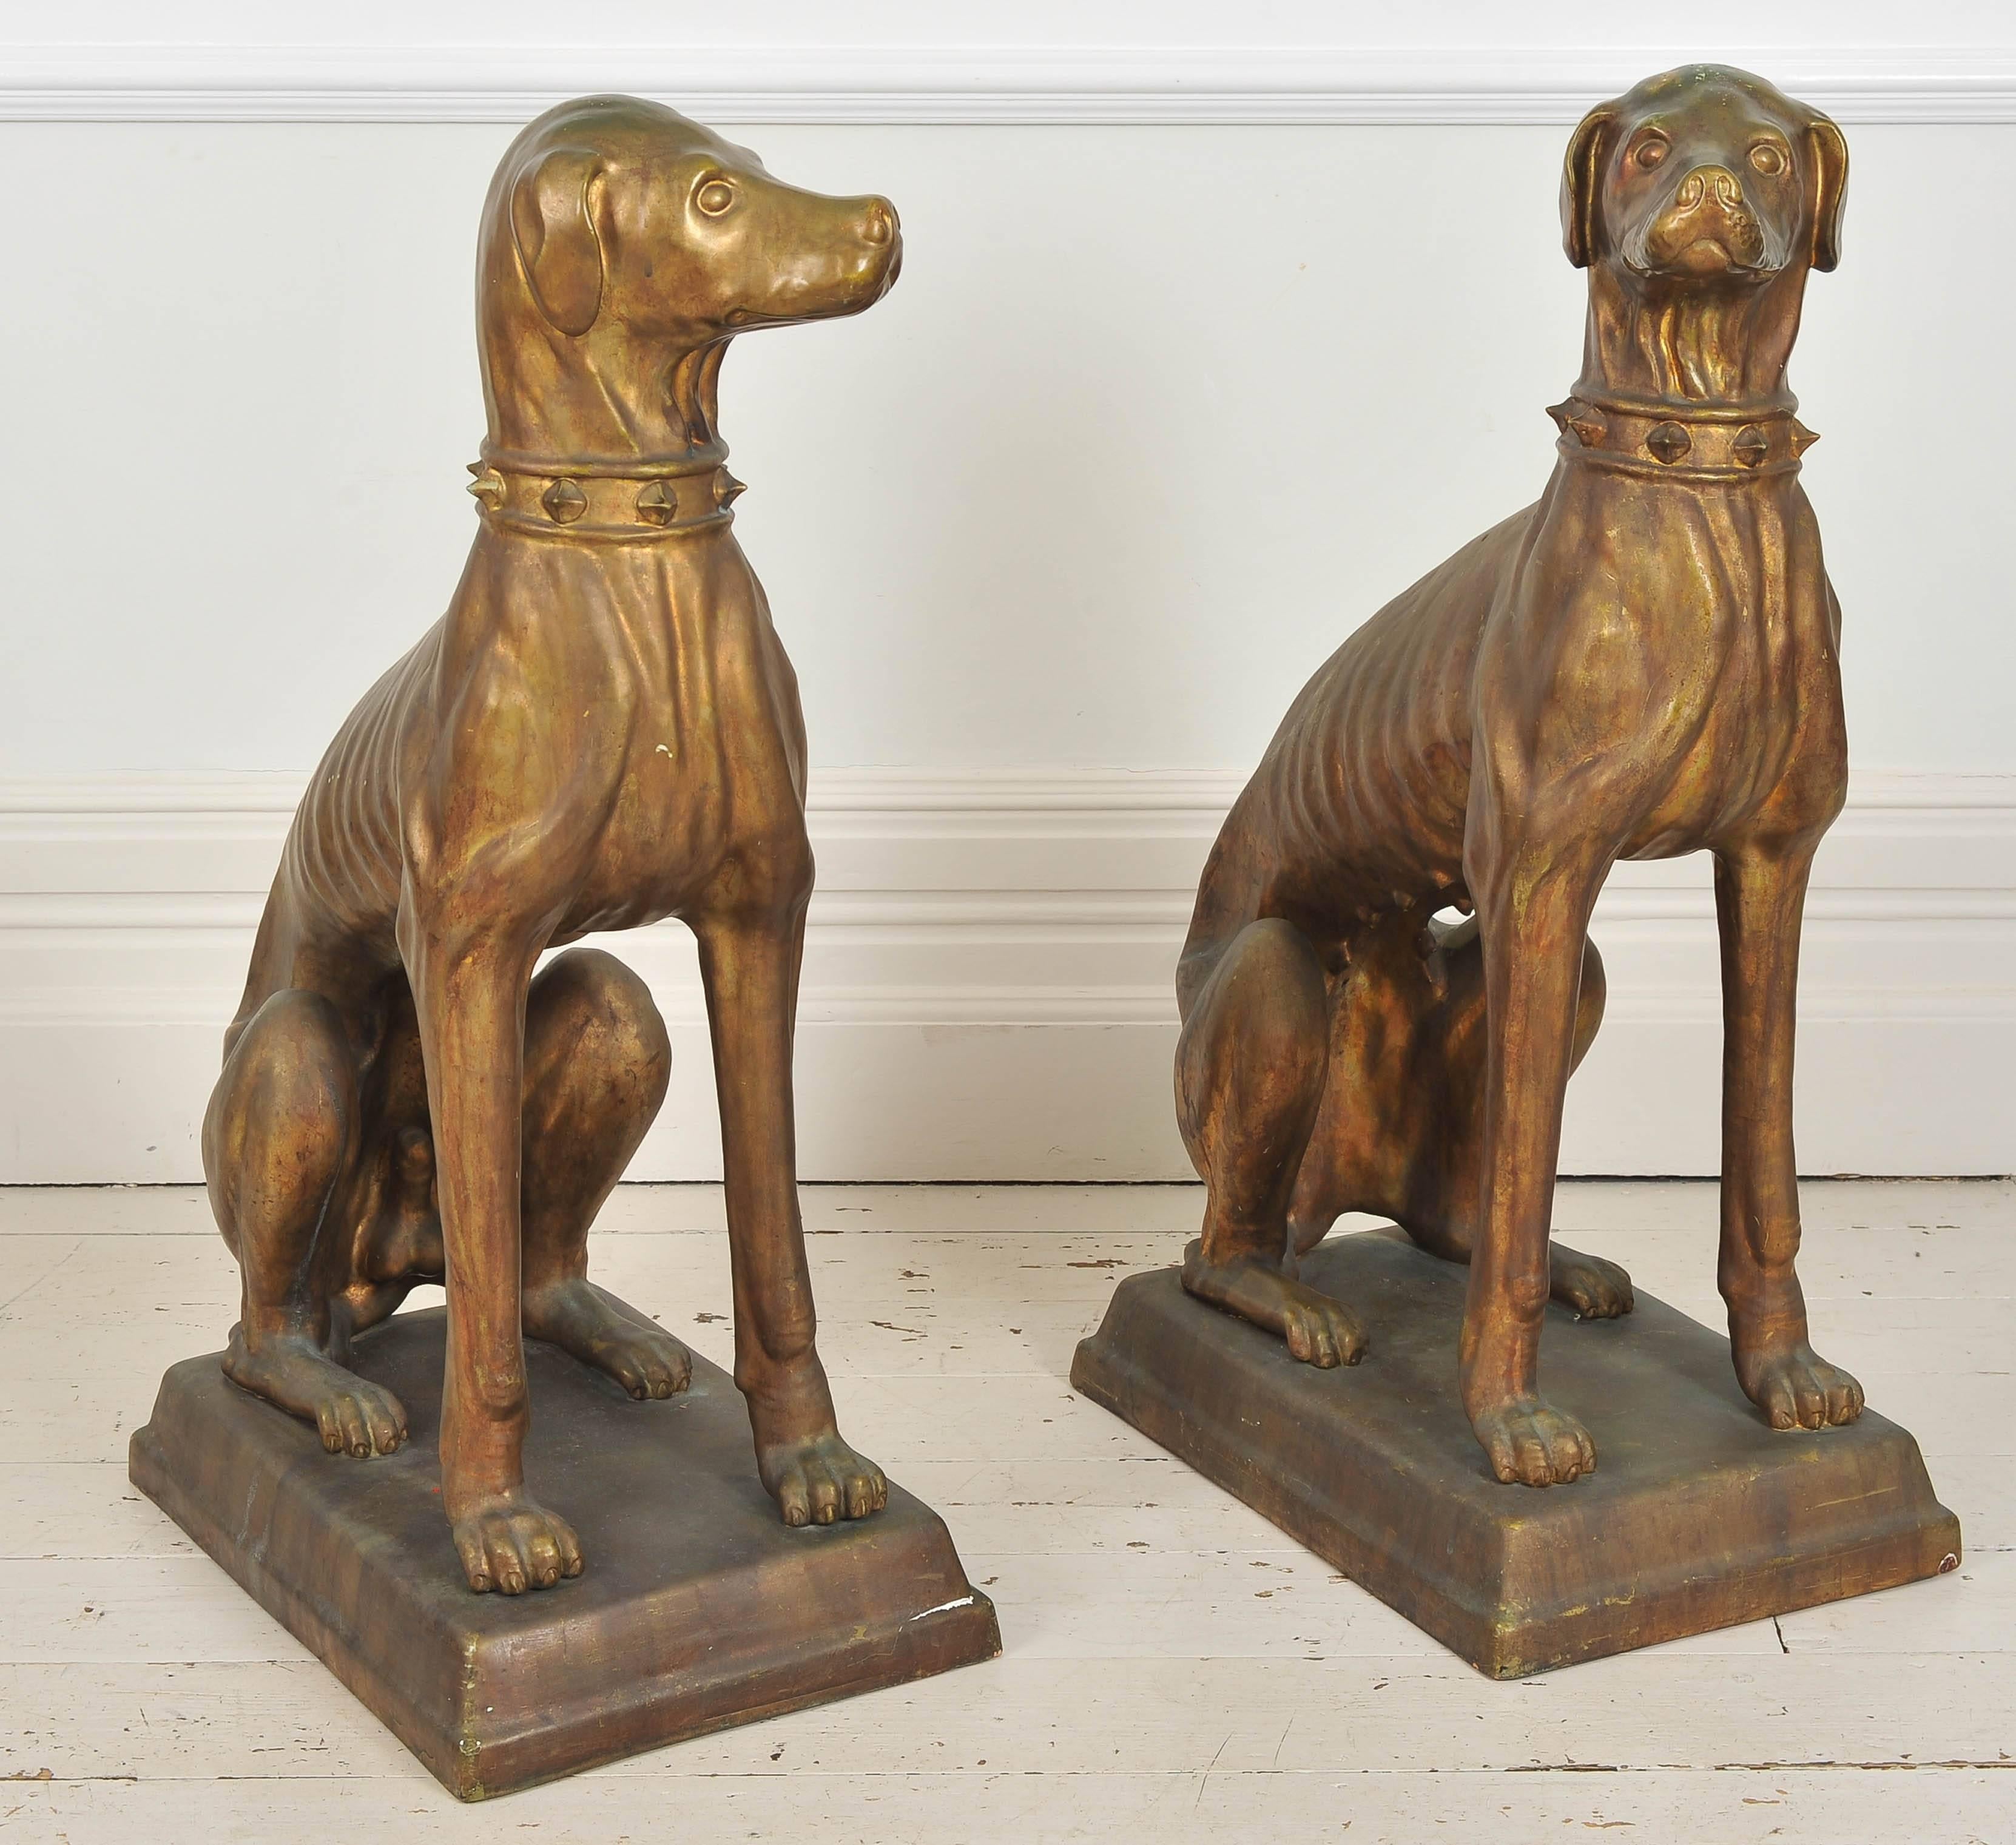 This very grand pair of Italian male and female terracotta dogs is unlike anything we've seen before. They are glazed with a wonderful golden bronze color which gives them a luminous quality. The stature and scale of these dogs together with the